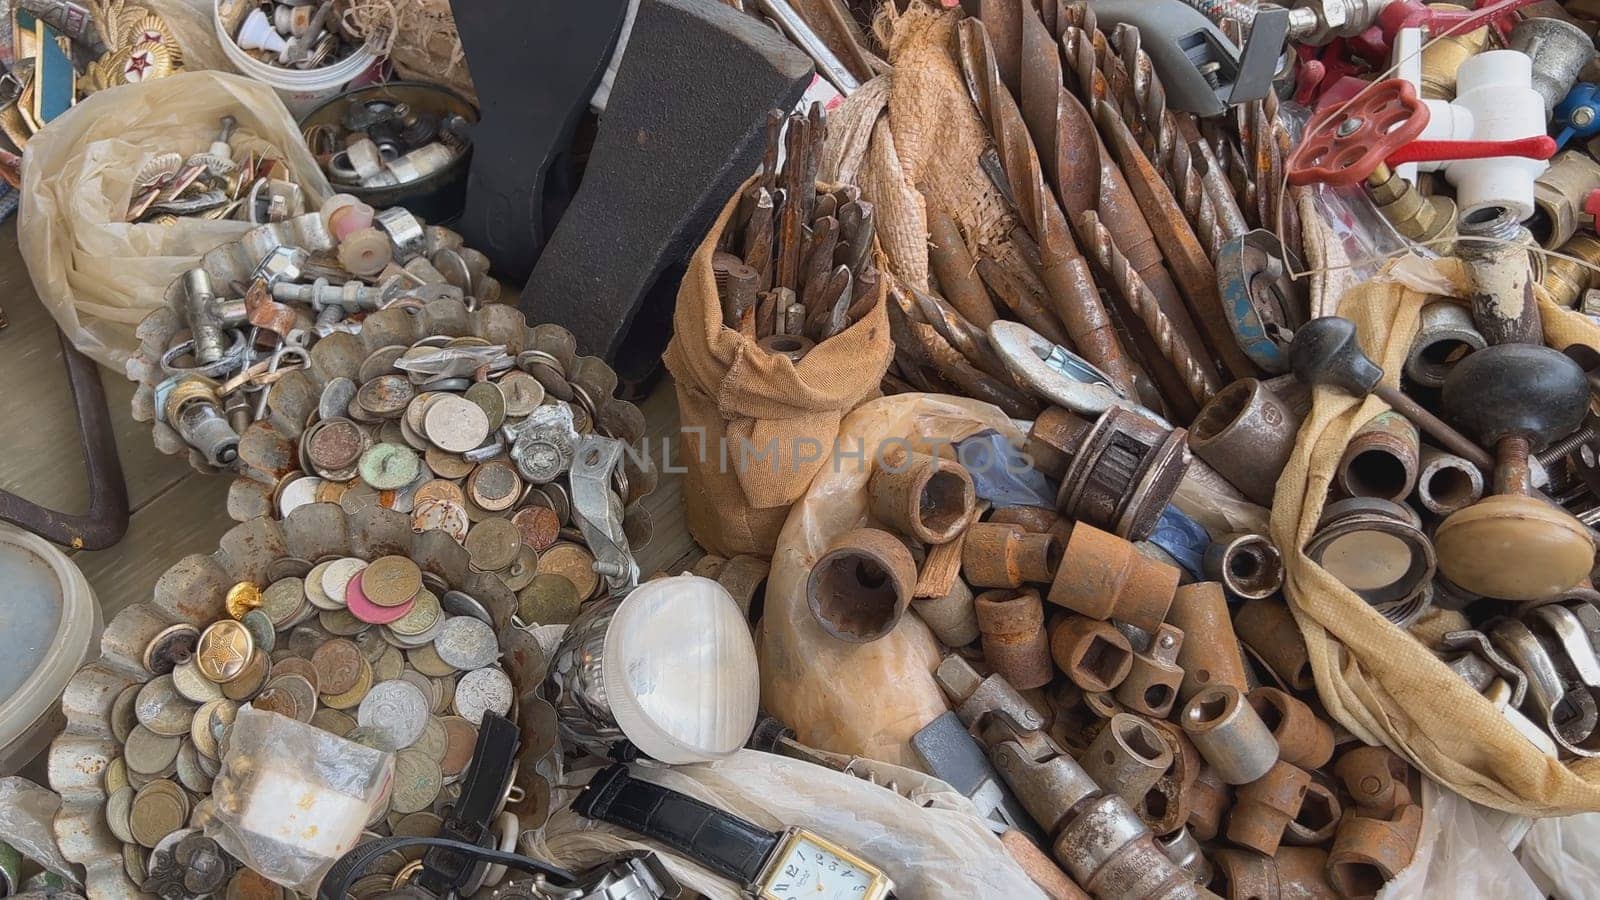 A flea market of old rusty things and tools